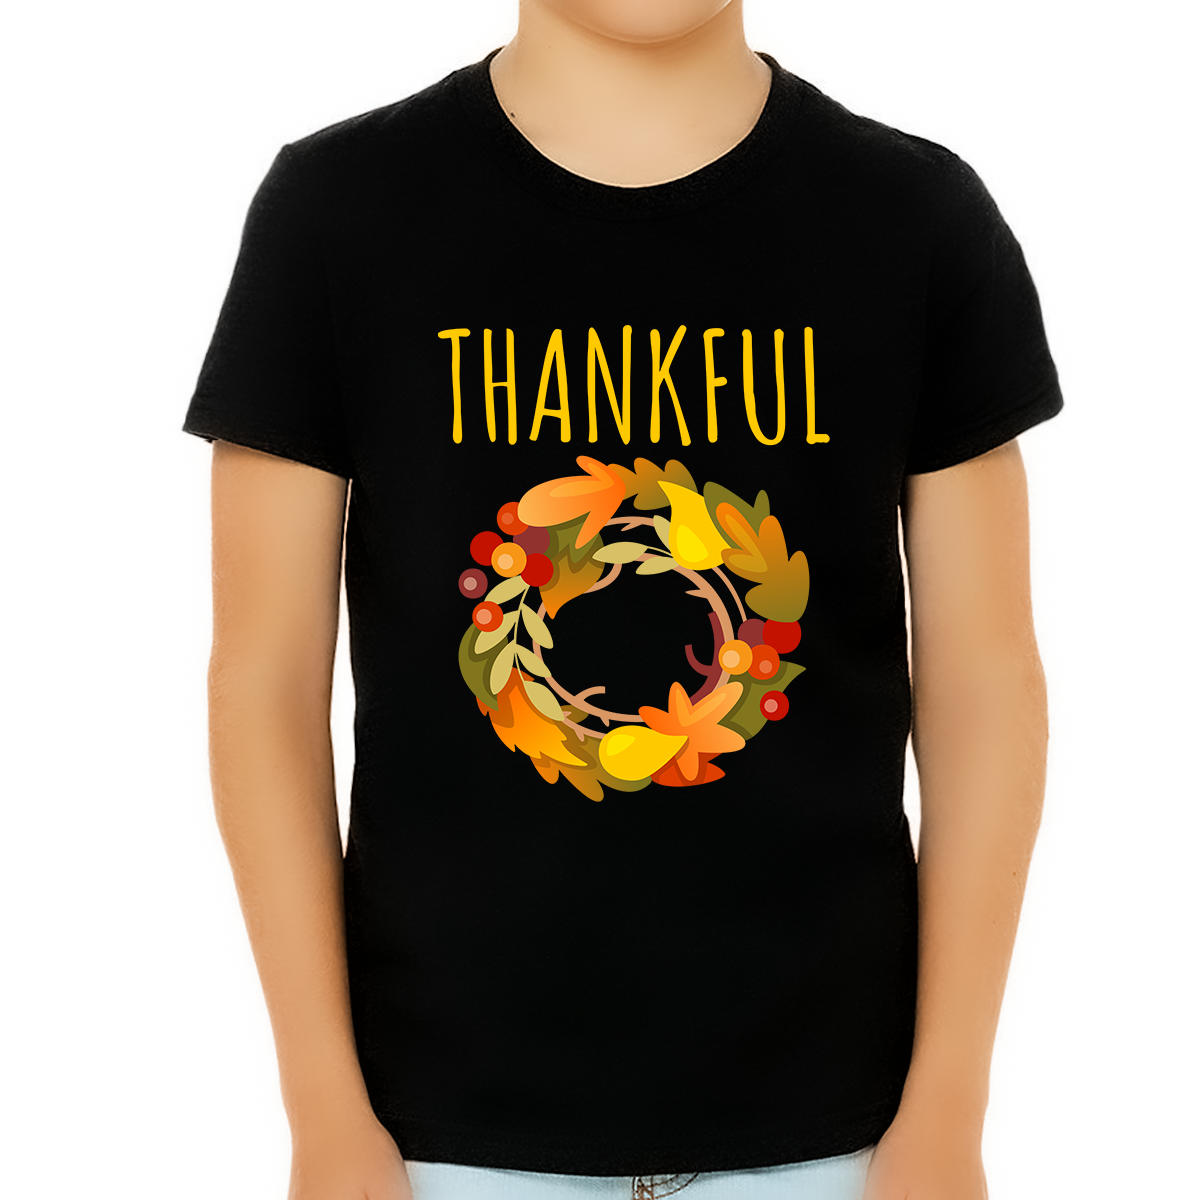 Thanksgiving Shirts for Boys Thanksgiving Clothes for Kids Fall Tops for Boys Thanksgiving Shirts for Kids